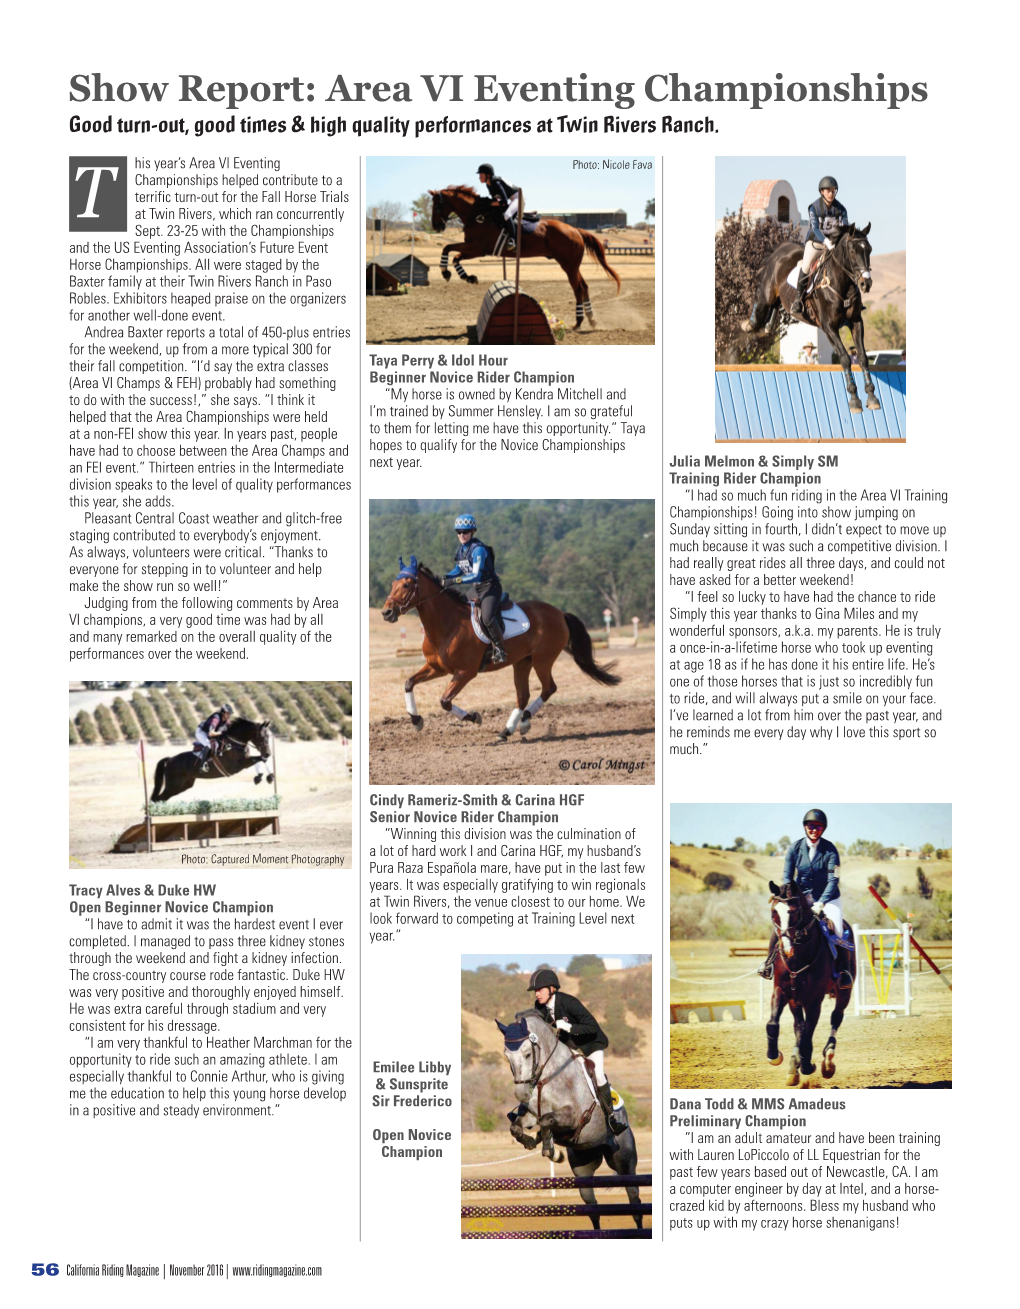 Show Report: Area VI Eventing Championships Good Turn-Out, Good Times & High Quality Performances at Twin Rivers Ranch